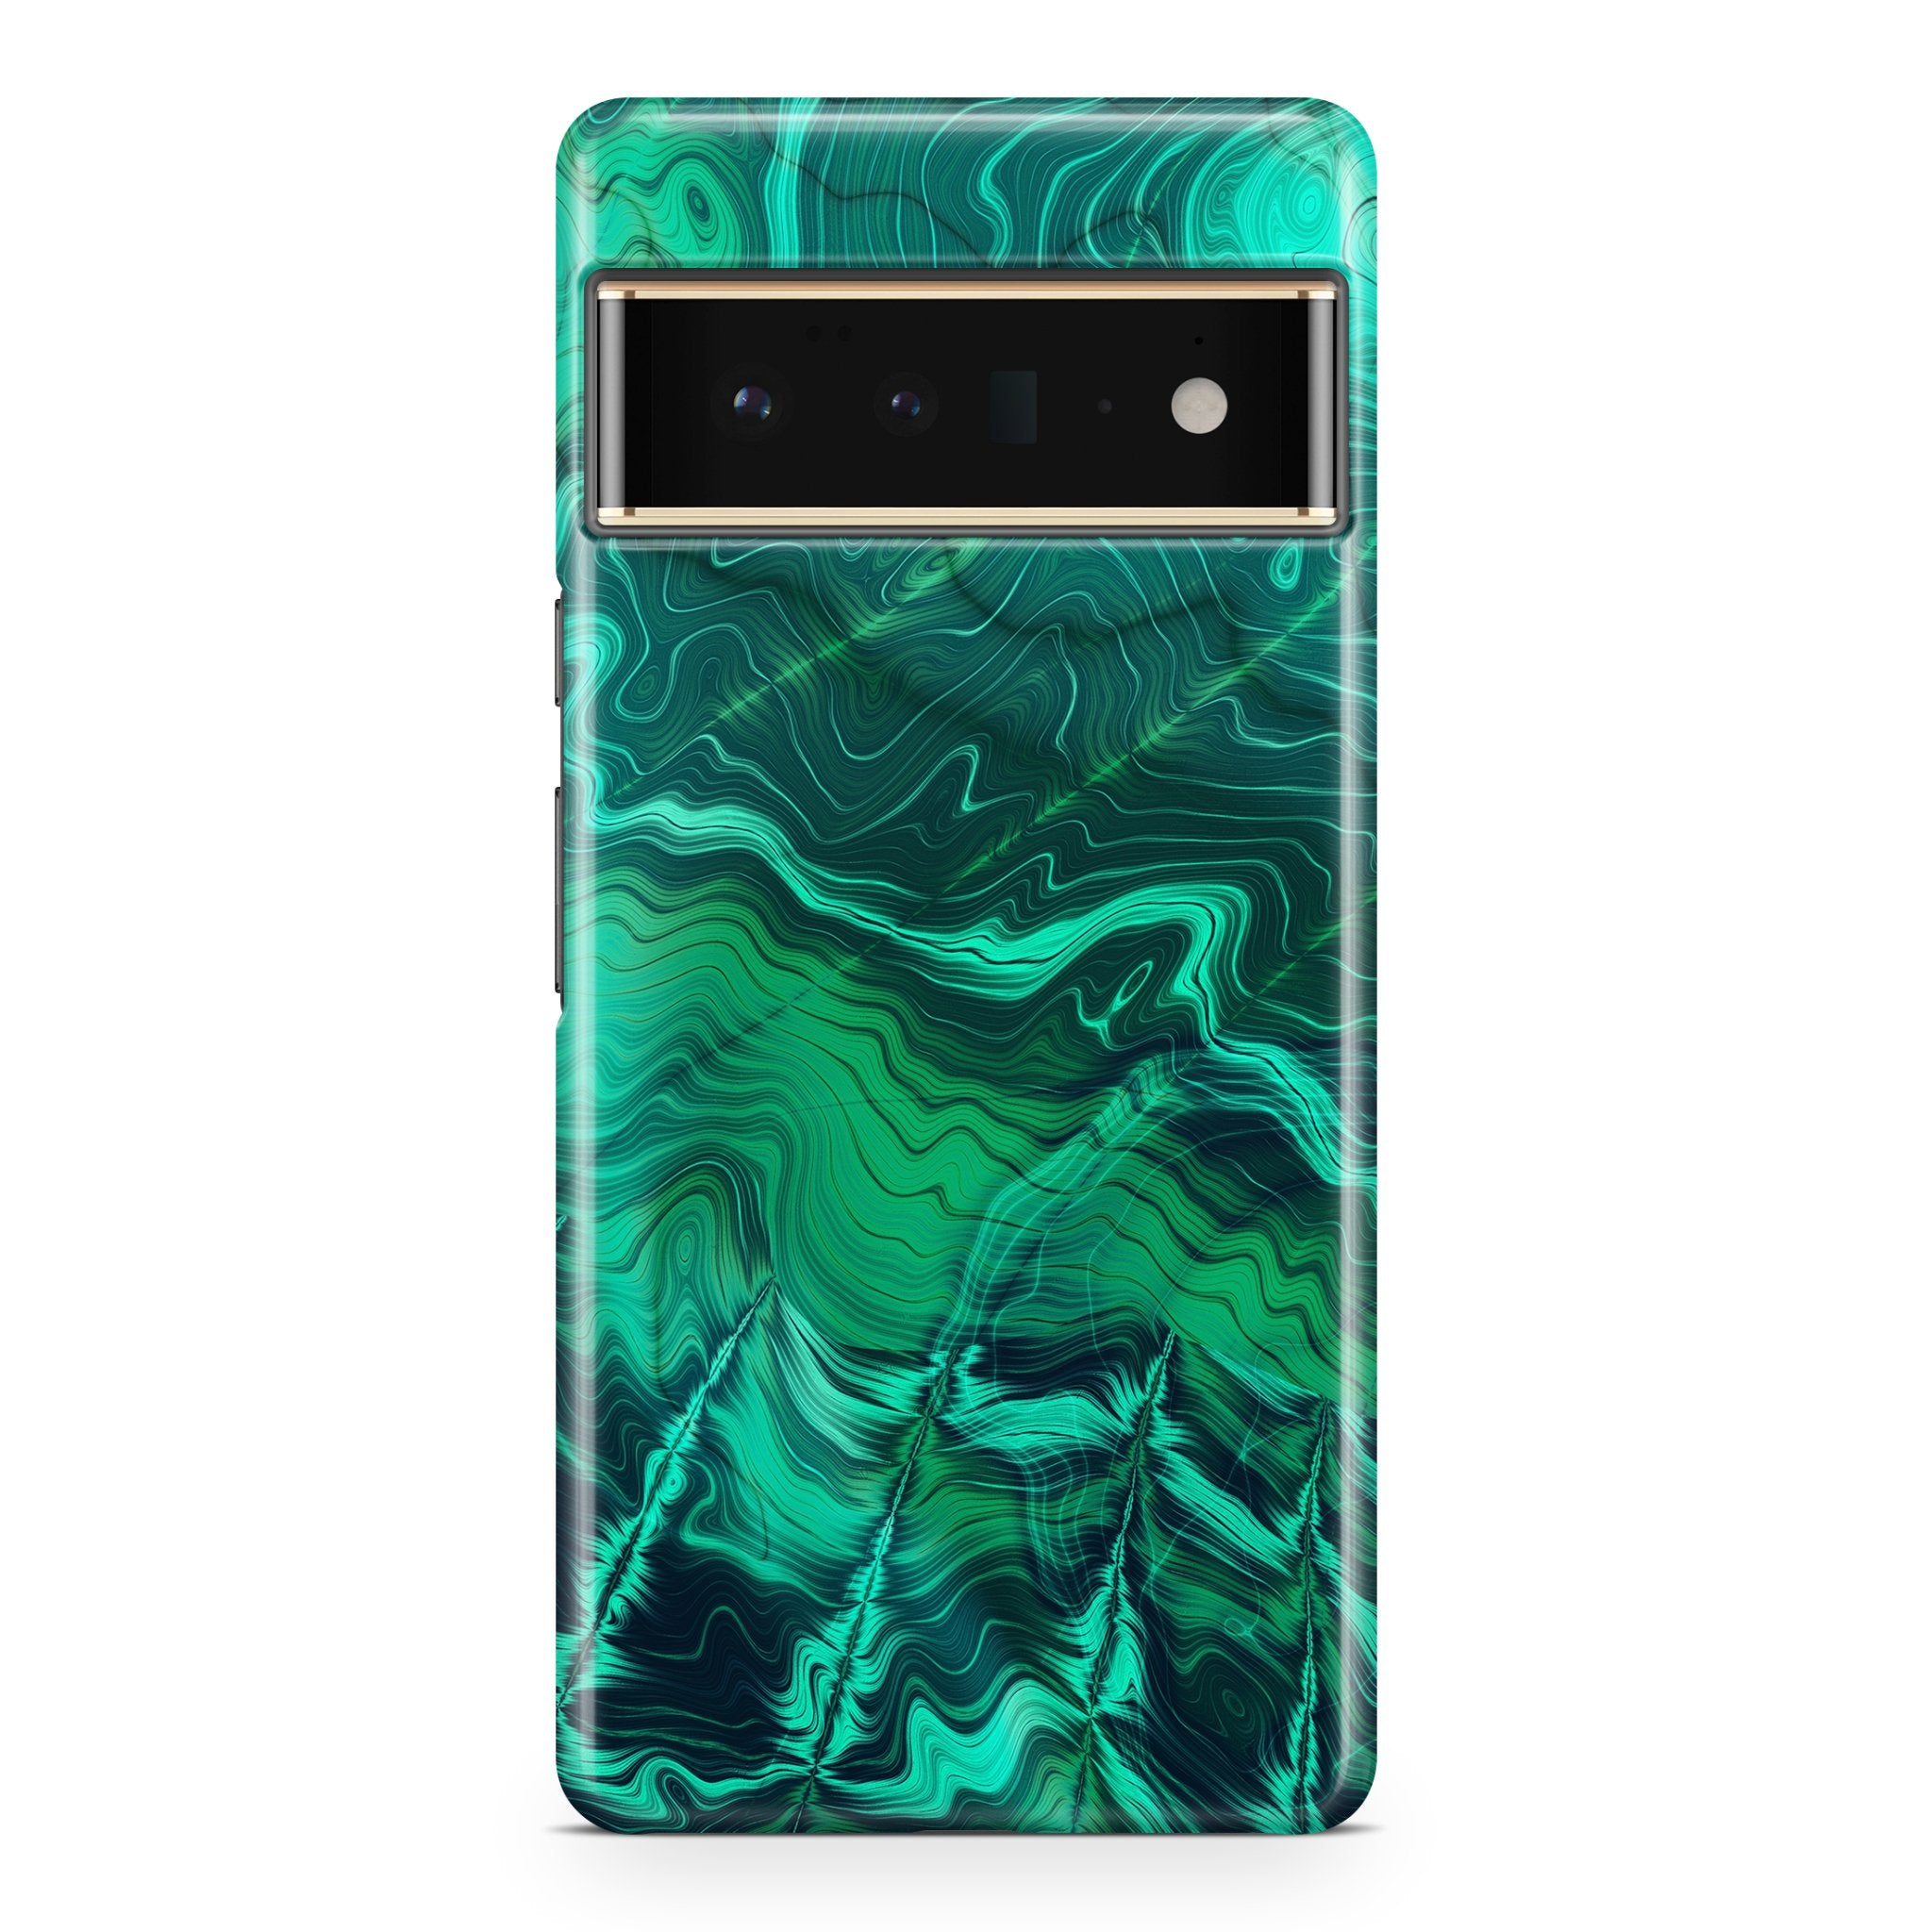 Malachite III - Google phone case designs by CaseSwagger